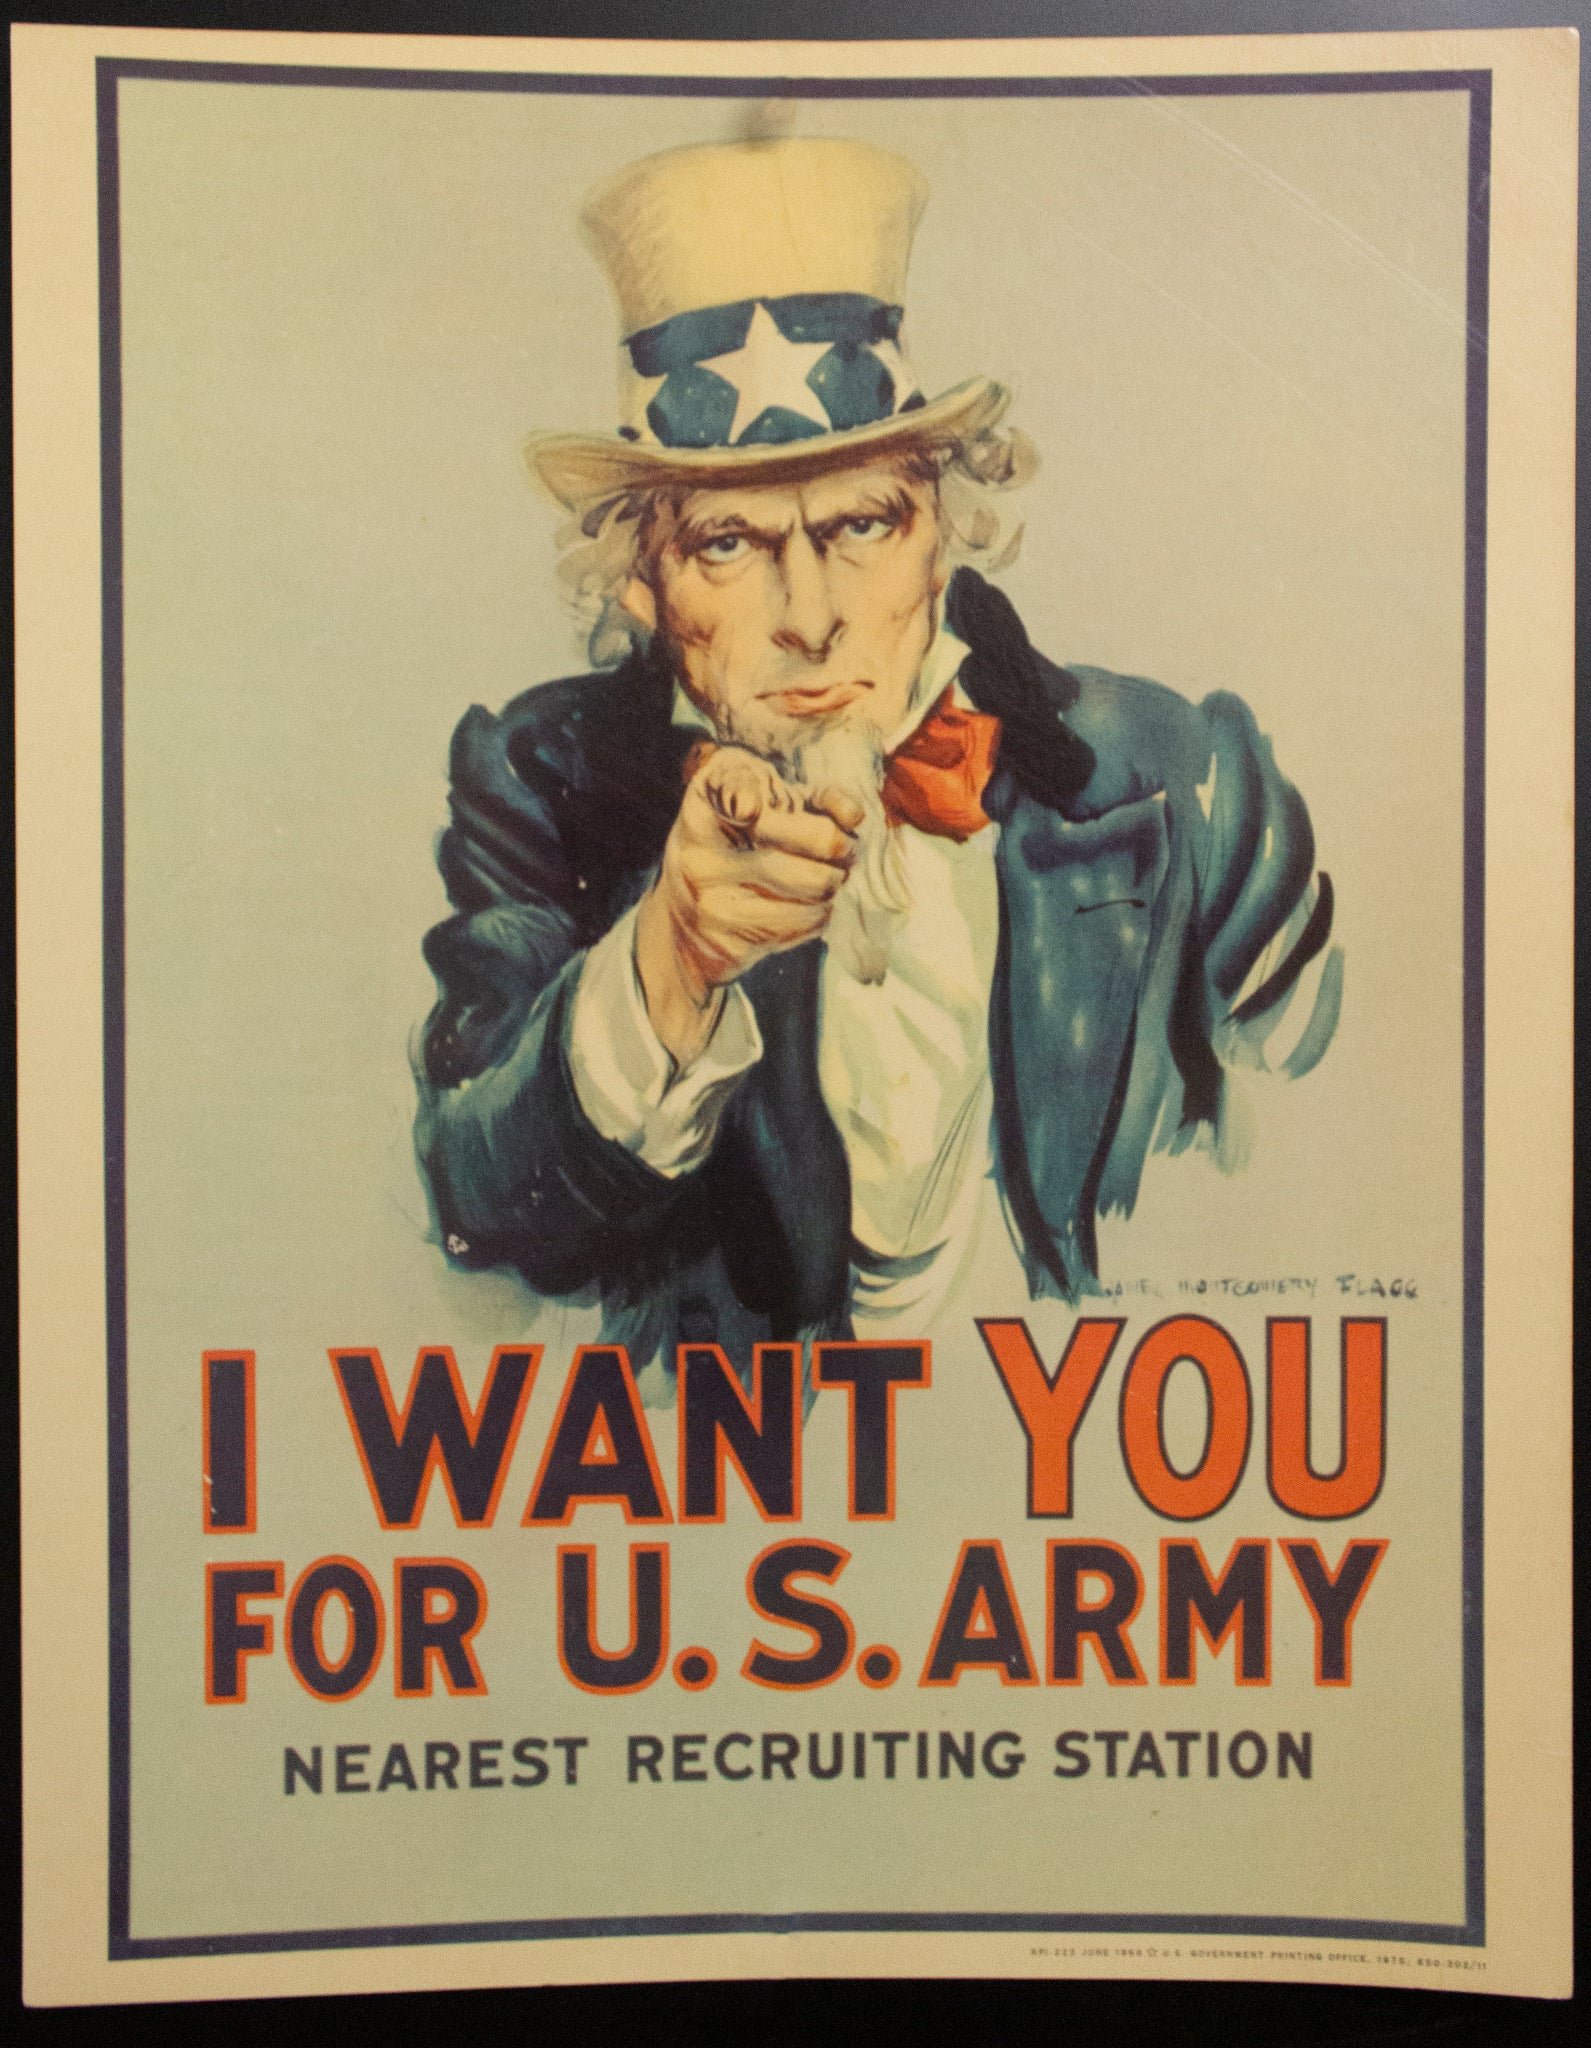 1975 I Want You For U.S. Army Uncle Sam Window Card Poster Vietnam War Era